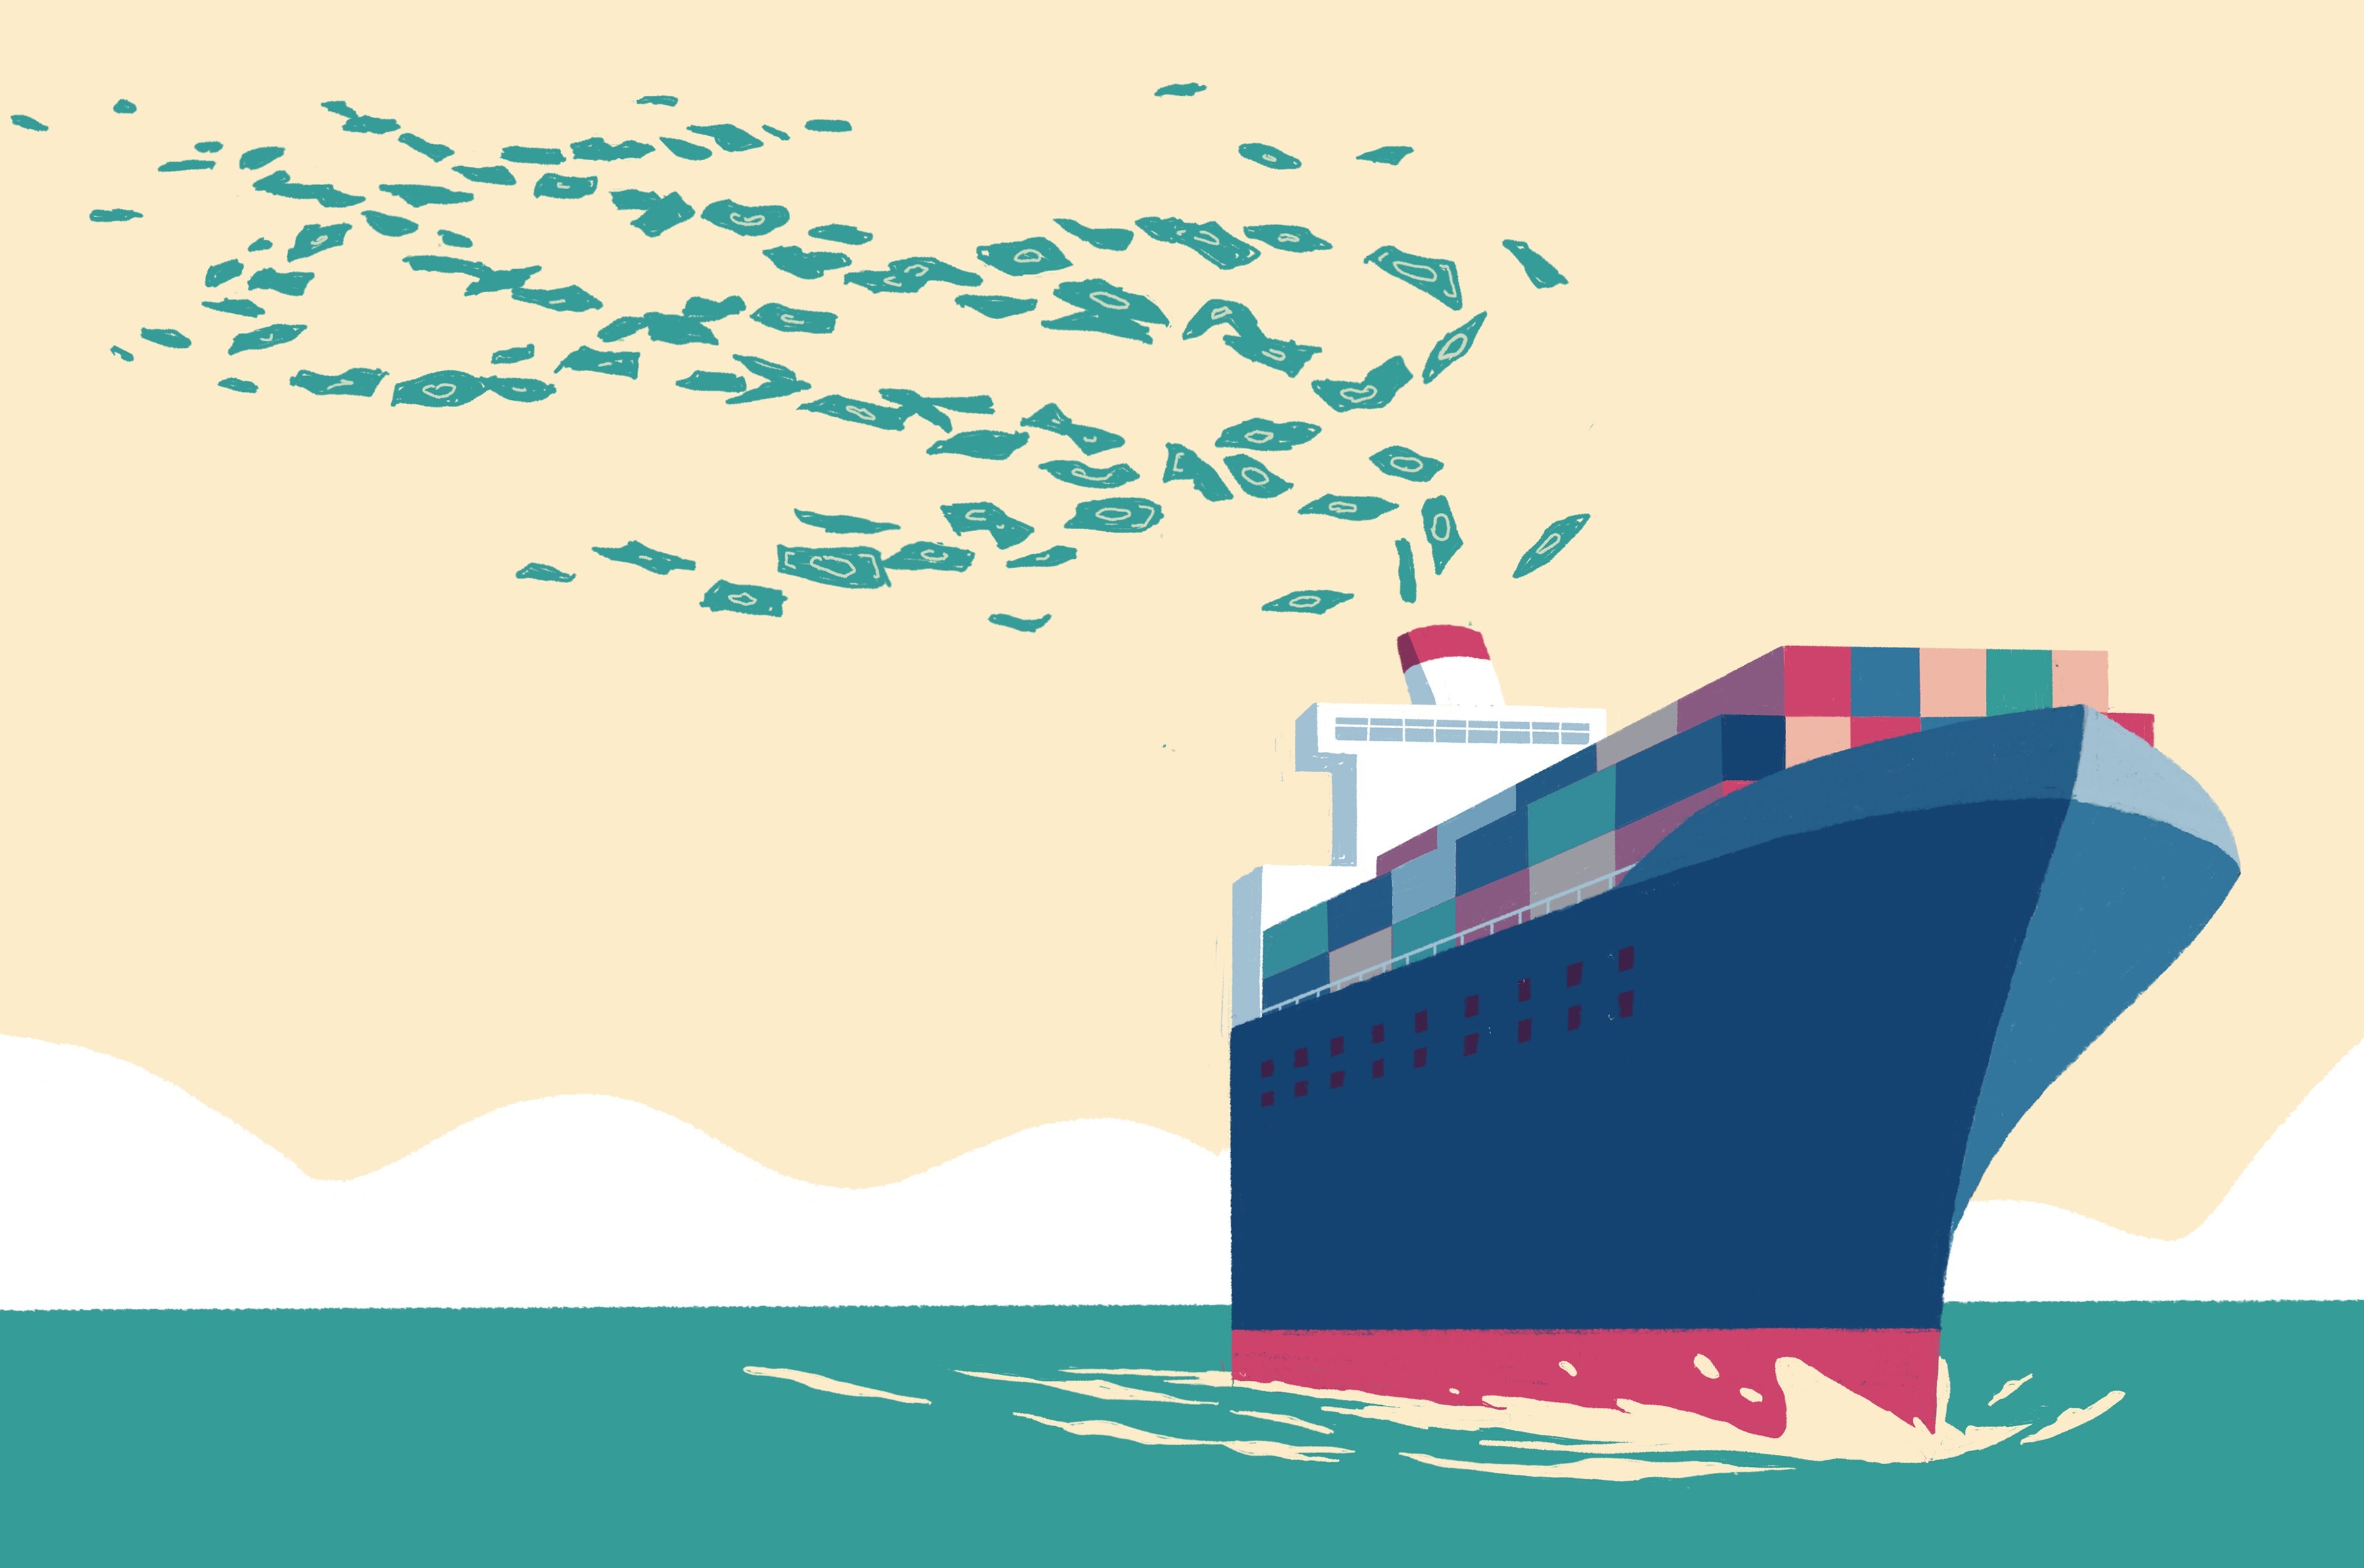 Disruptions caused by the coronavirus pandemic have driven shipping costs to record levels. Illustration: Perry Tse